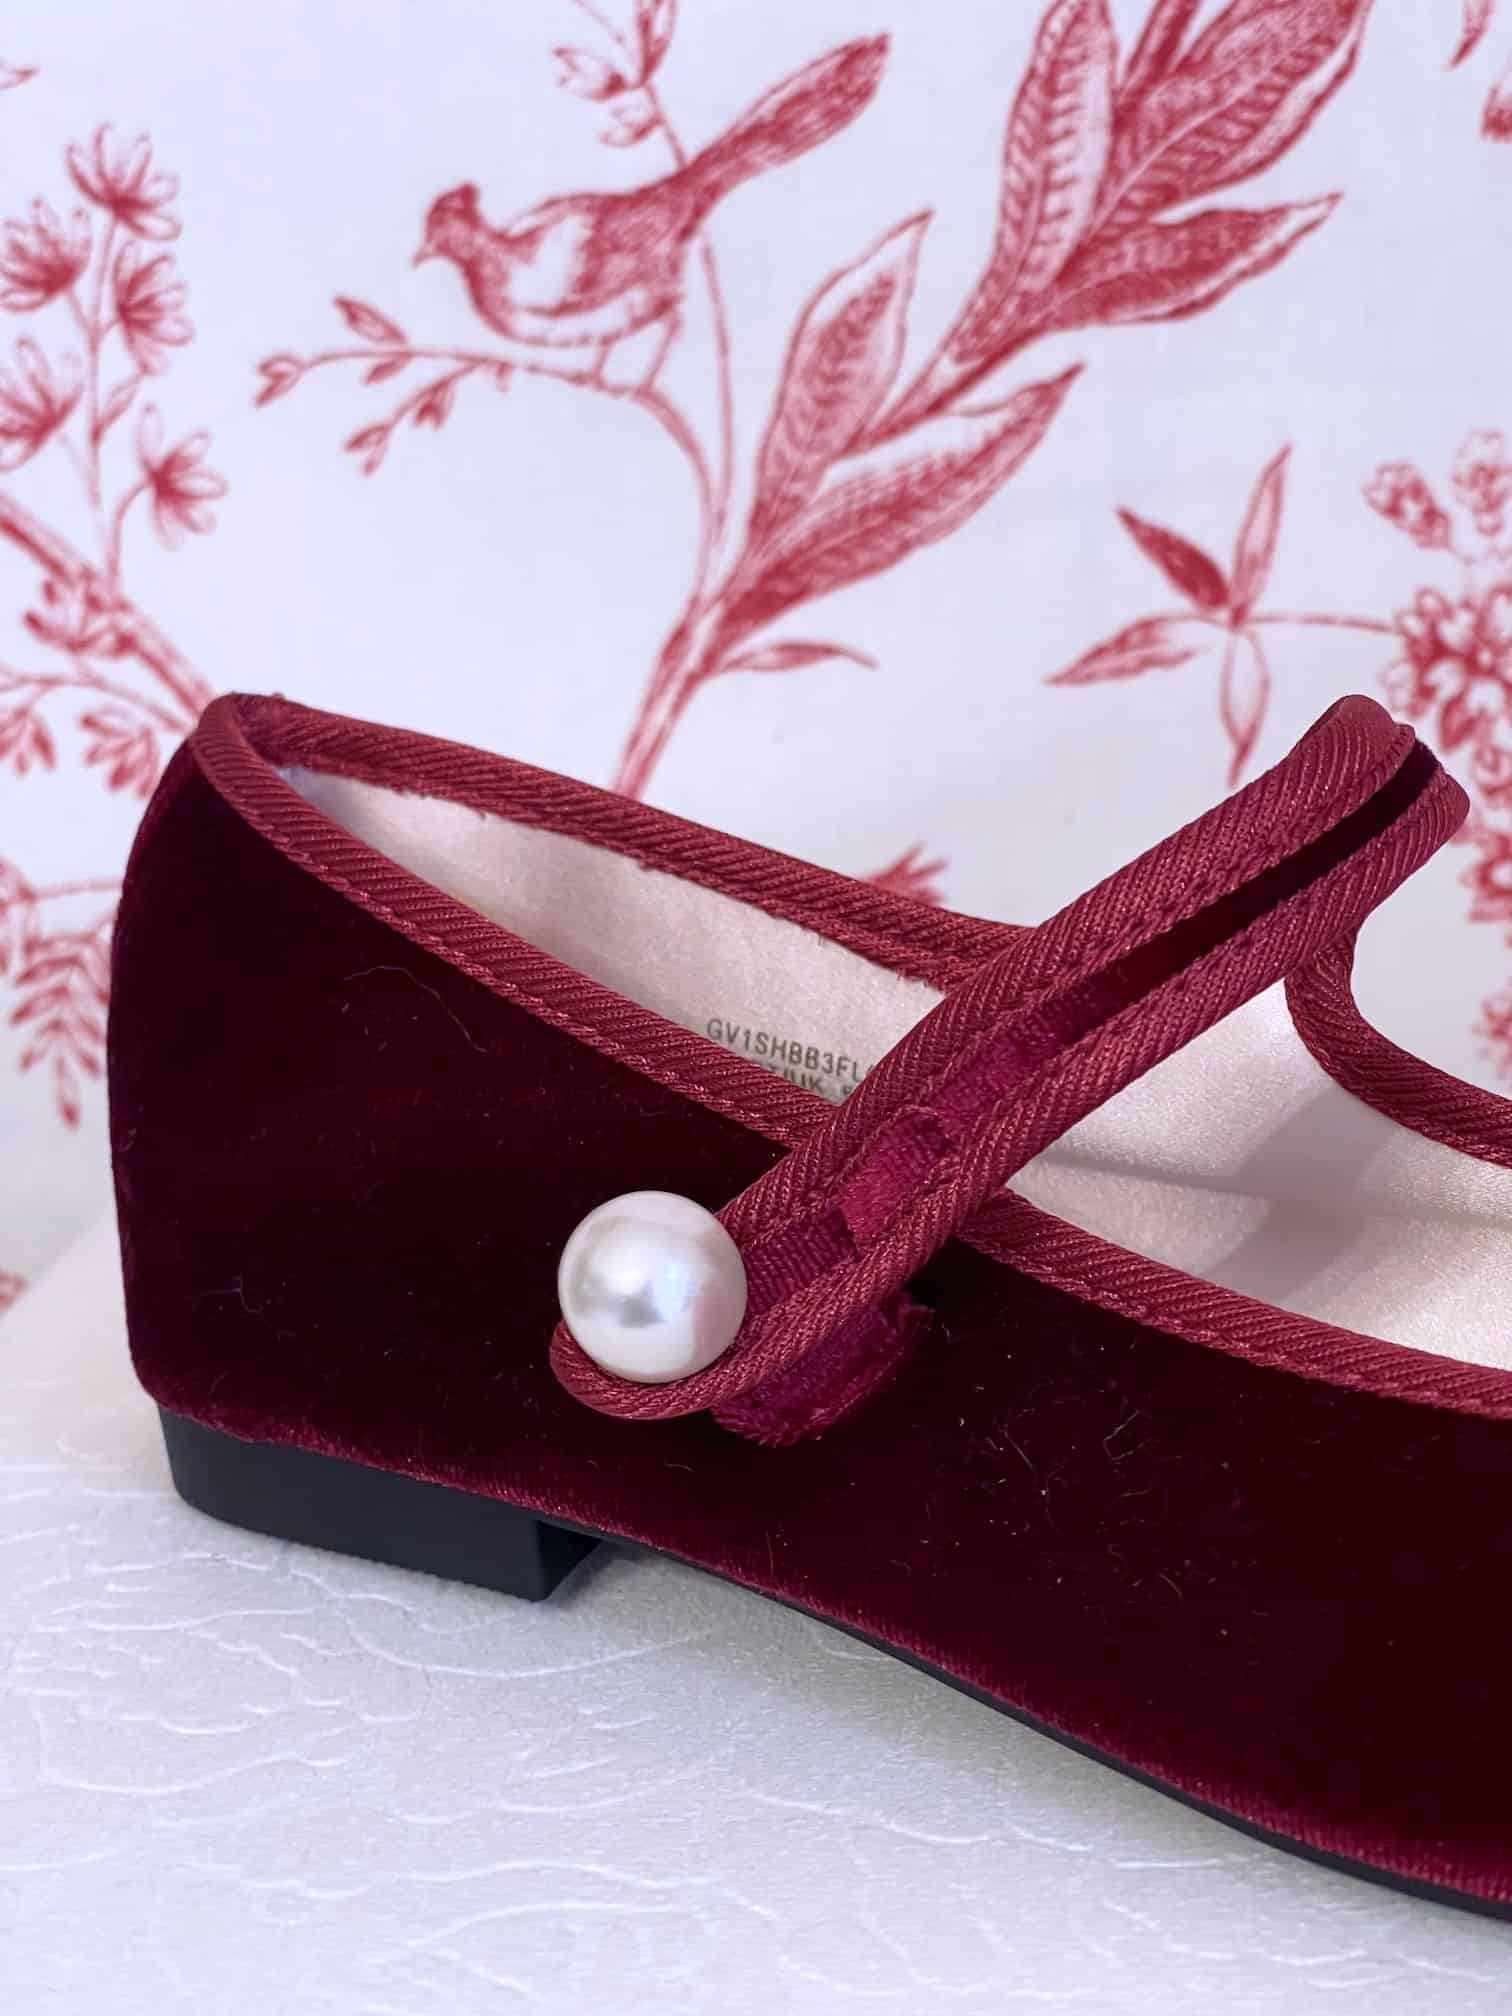 A pair of Historically Inspired Renaissance, Tudor, Baroque era Velvet Slipper Flats in Burgundy with pearl decorative button.